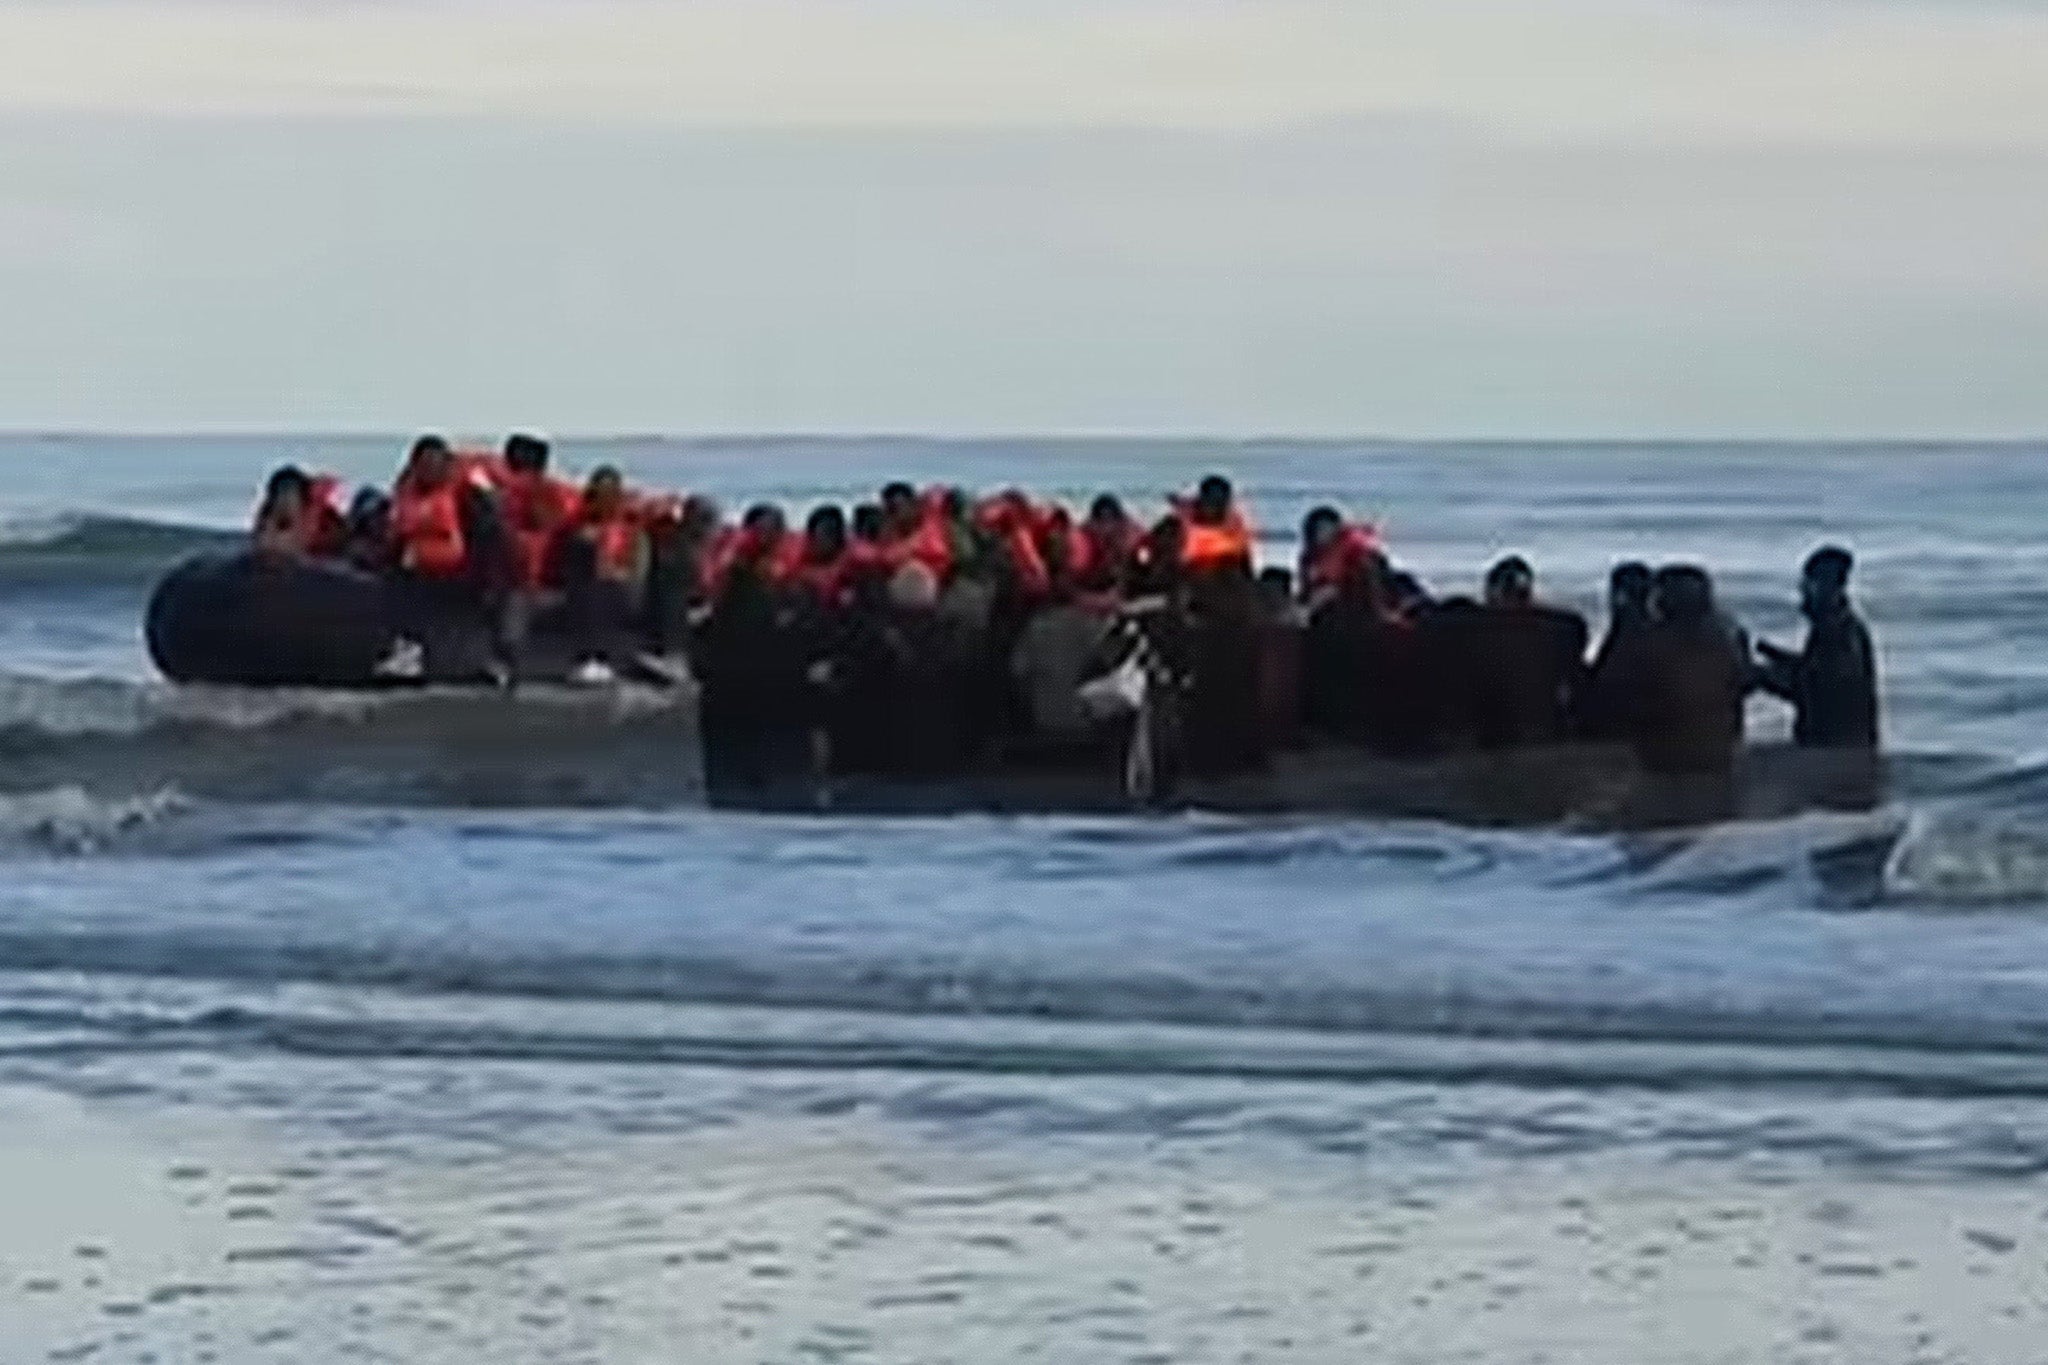 Migrants board a small boat leaving Dunkirk on Tuesday morning - the same day five migrants died attempting the English Channel crossing